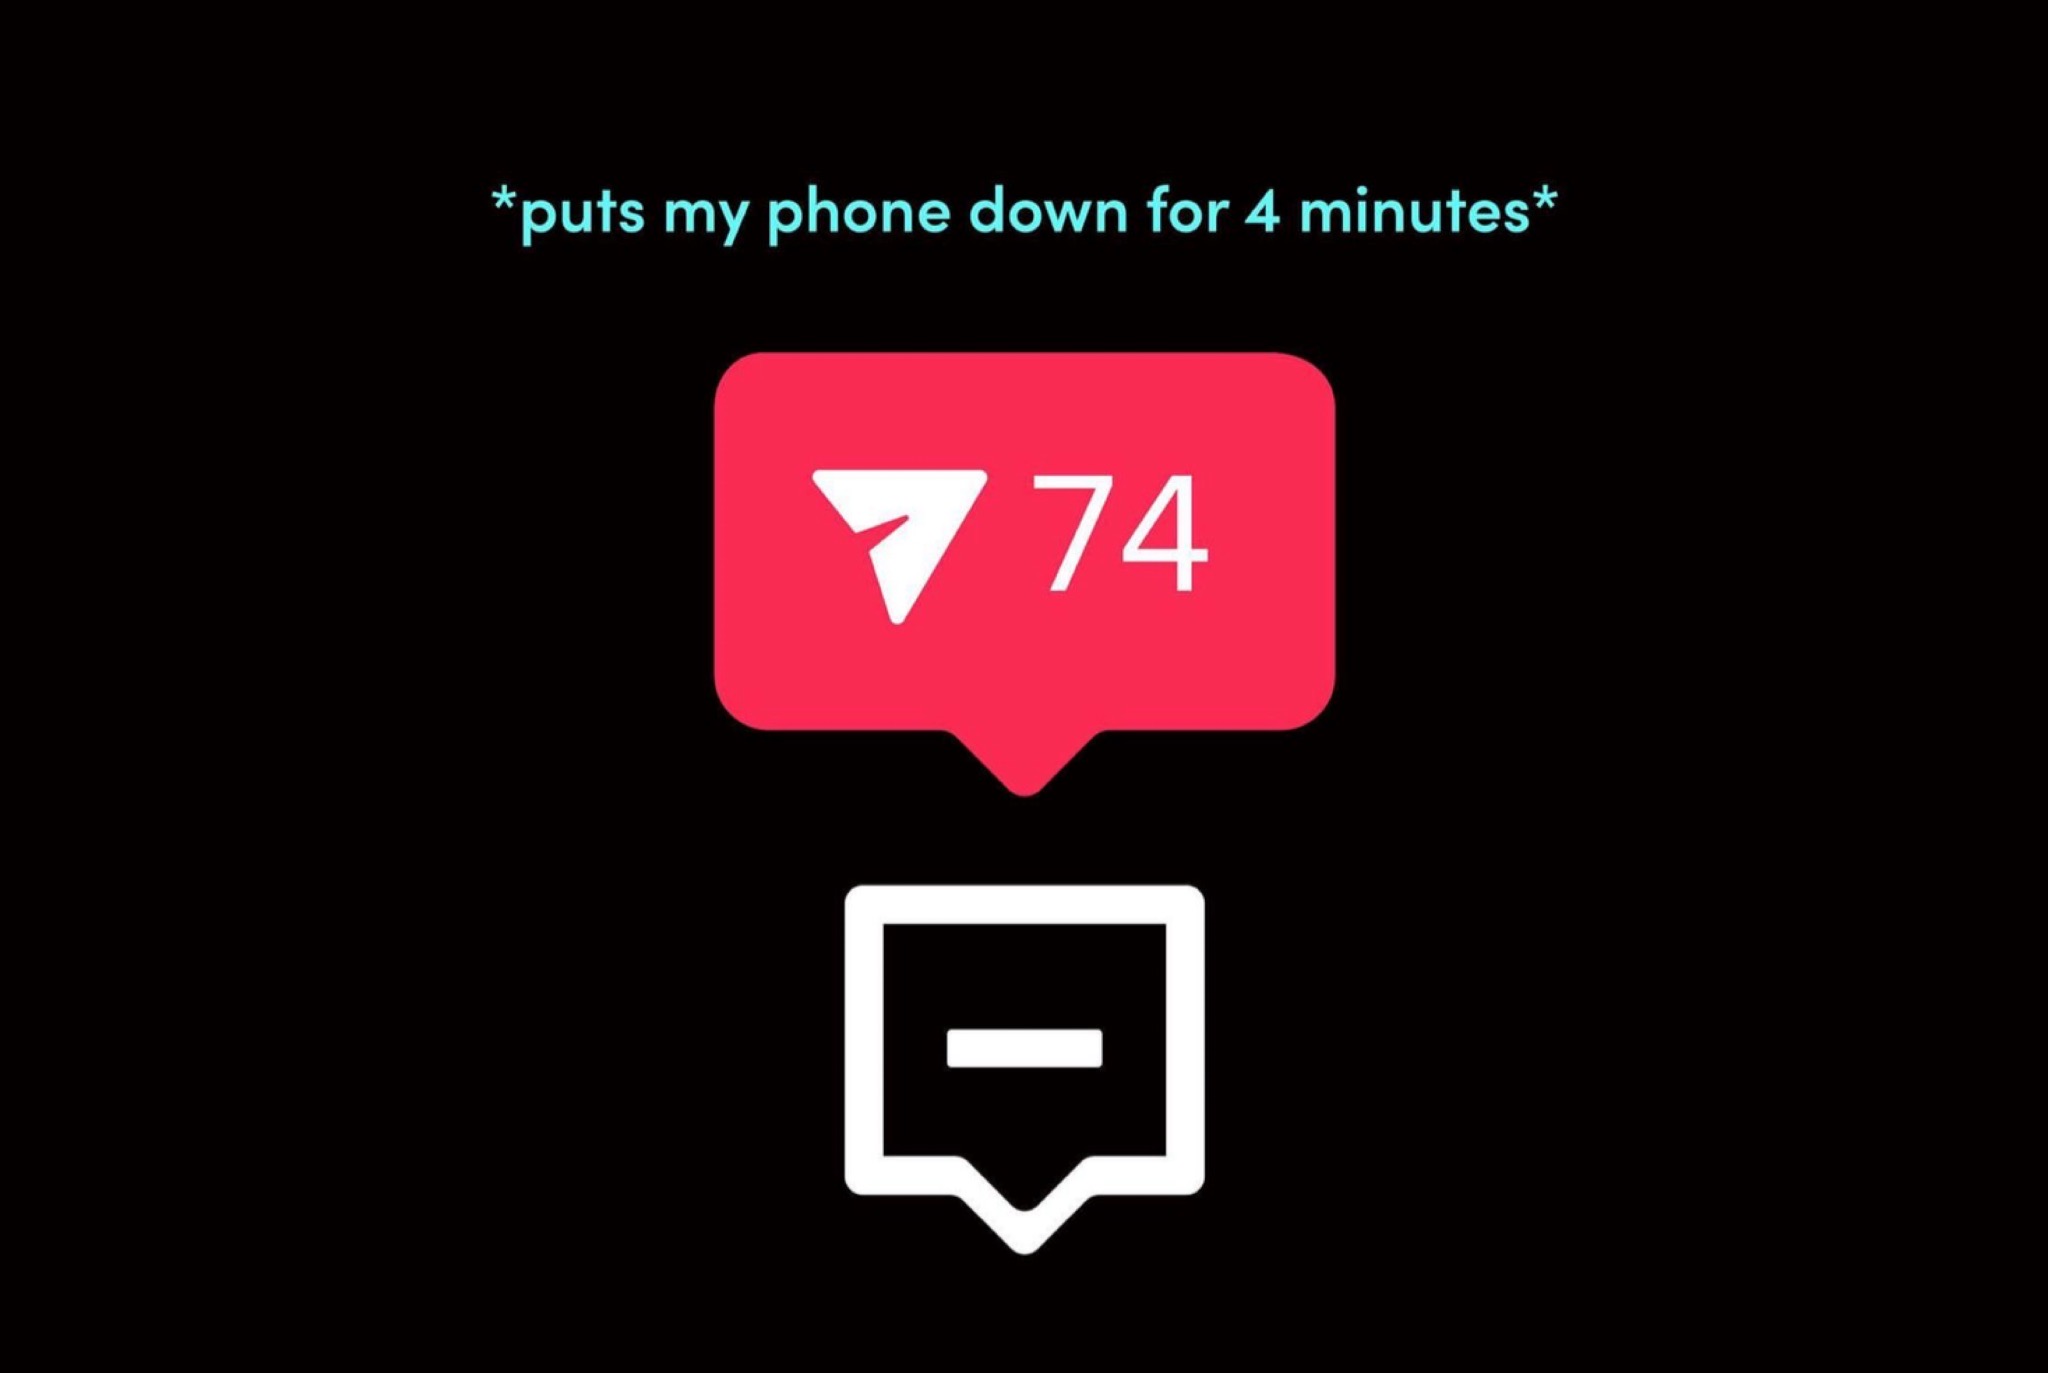 TikTok image that shows how many notifications one can get when not checking the app